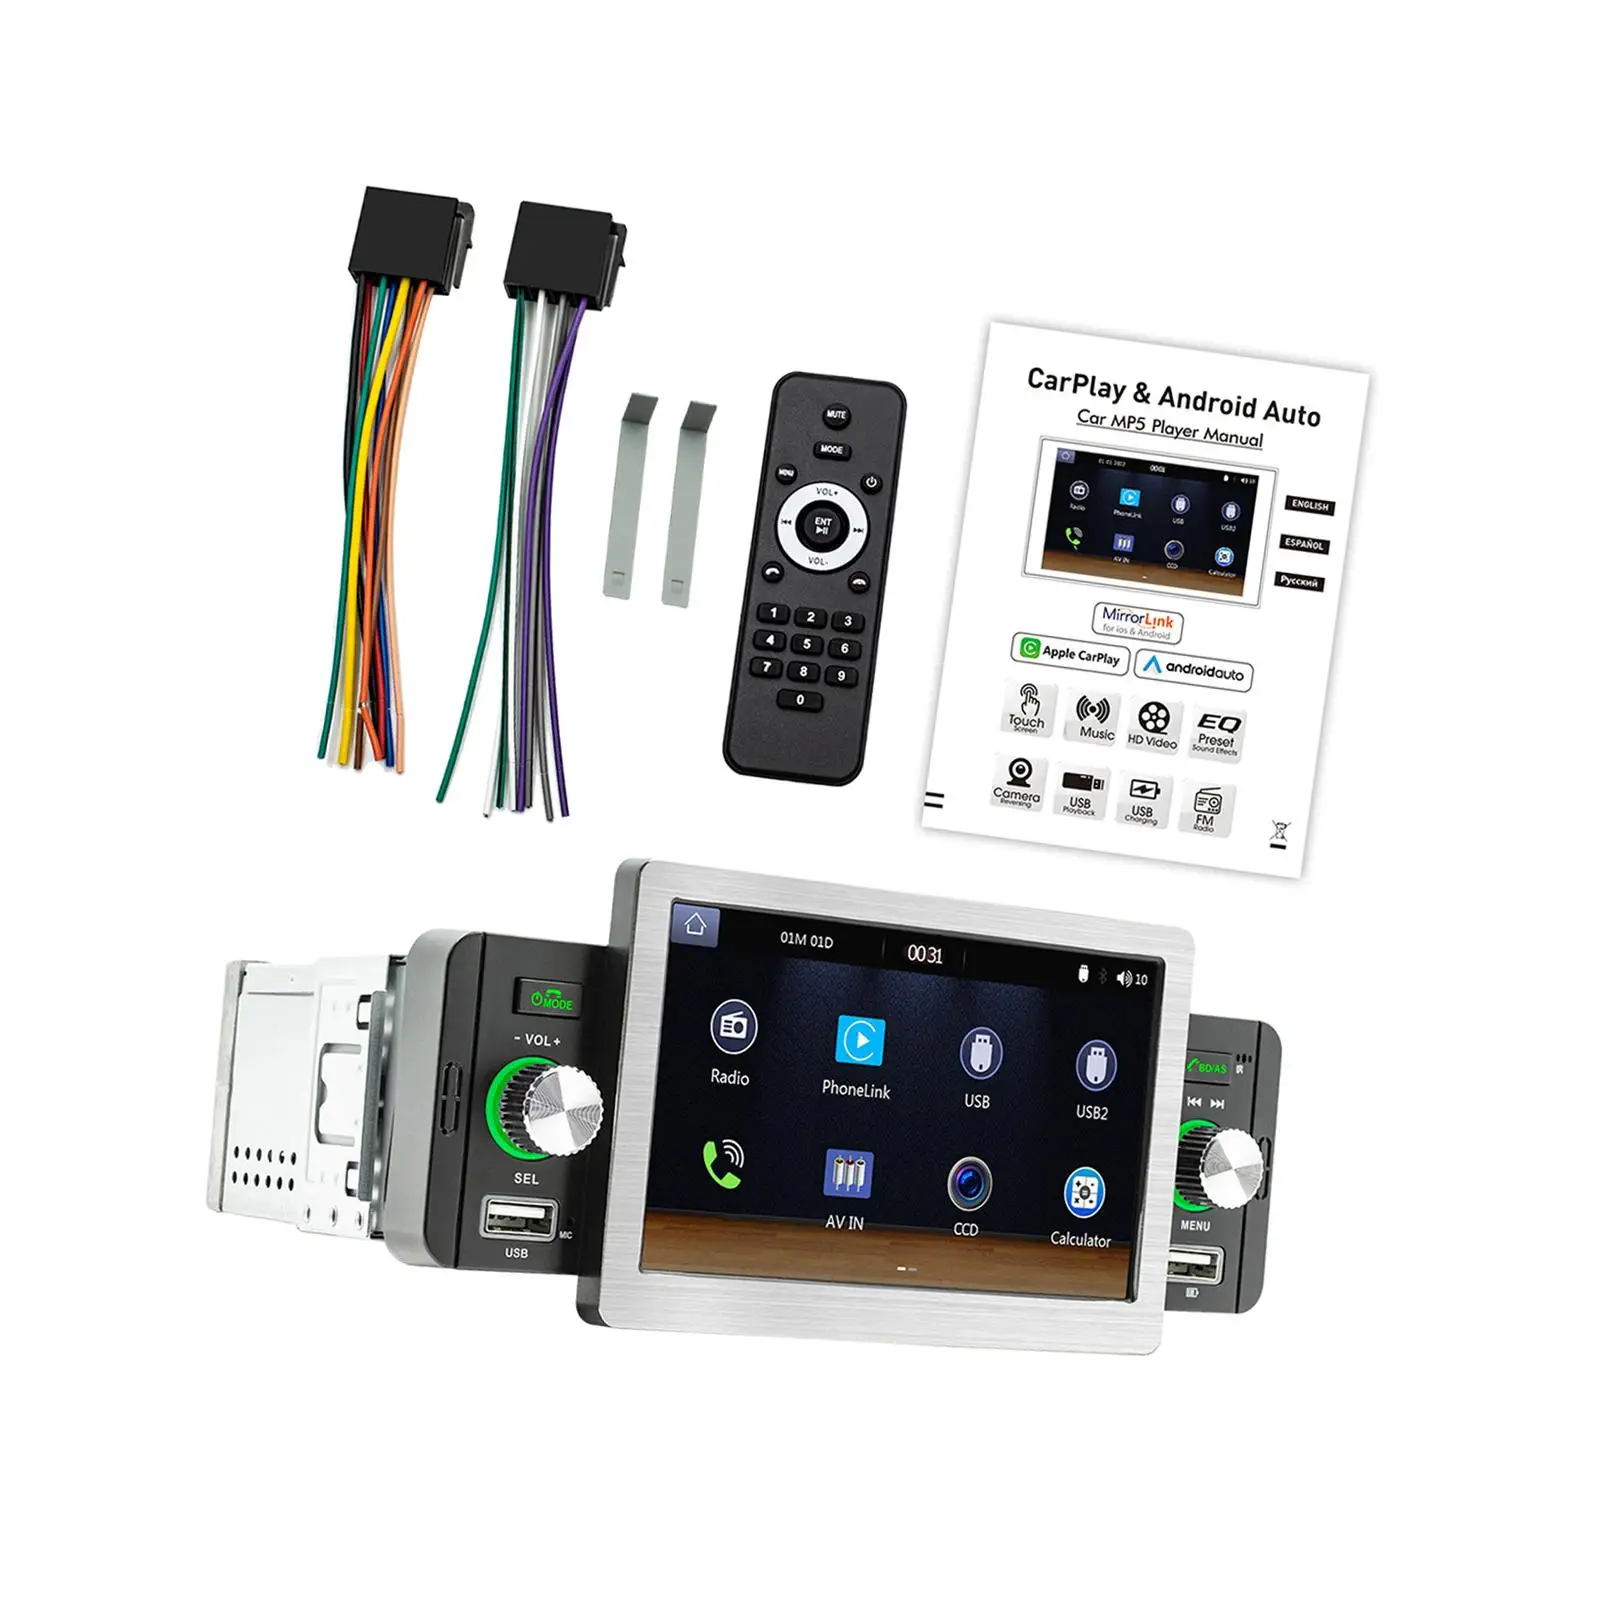 Car MP5 Player Mobile Screen Projection Touchscreen 5